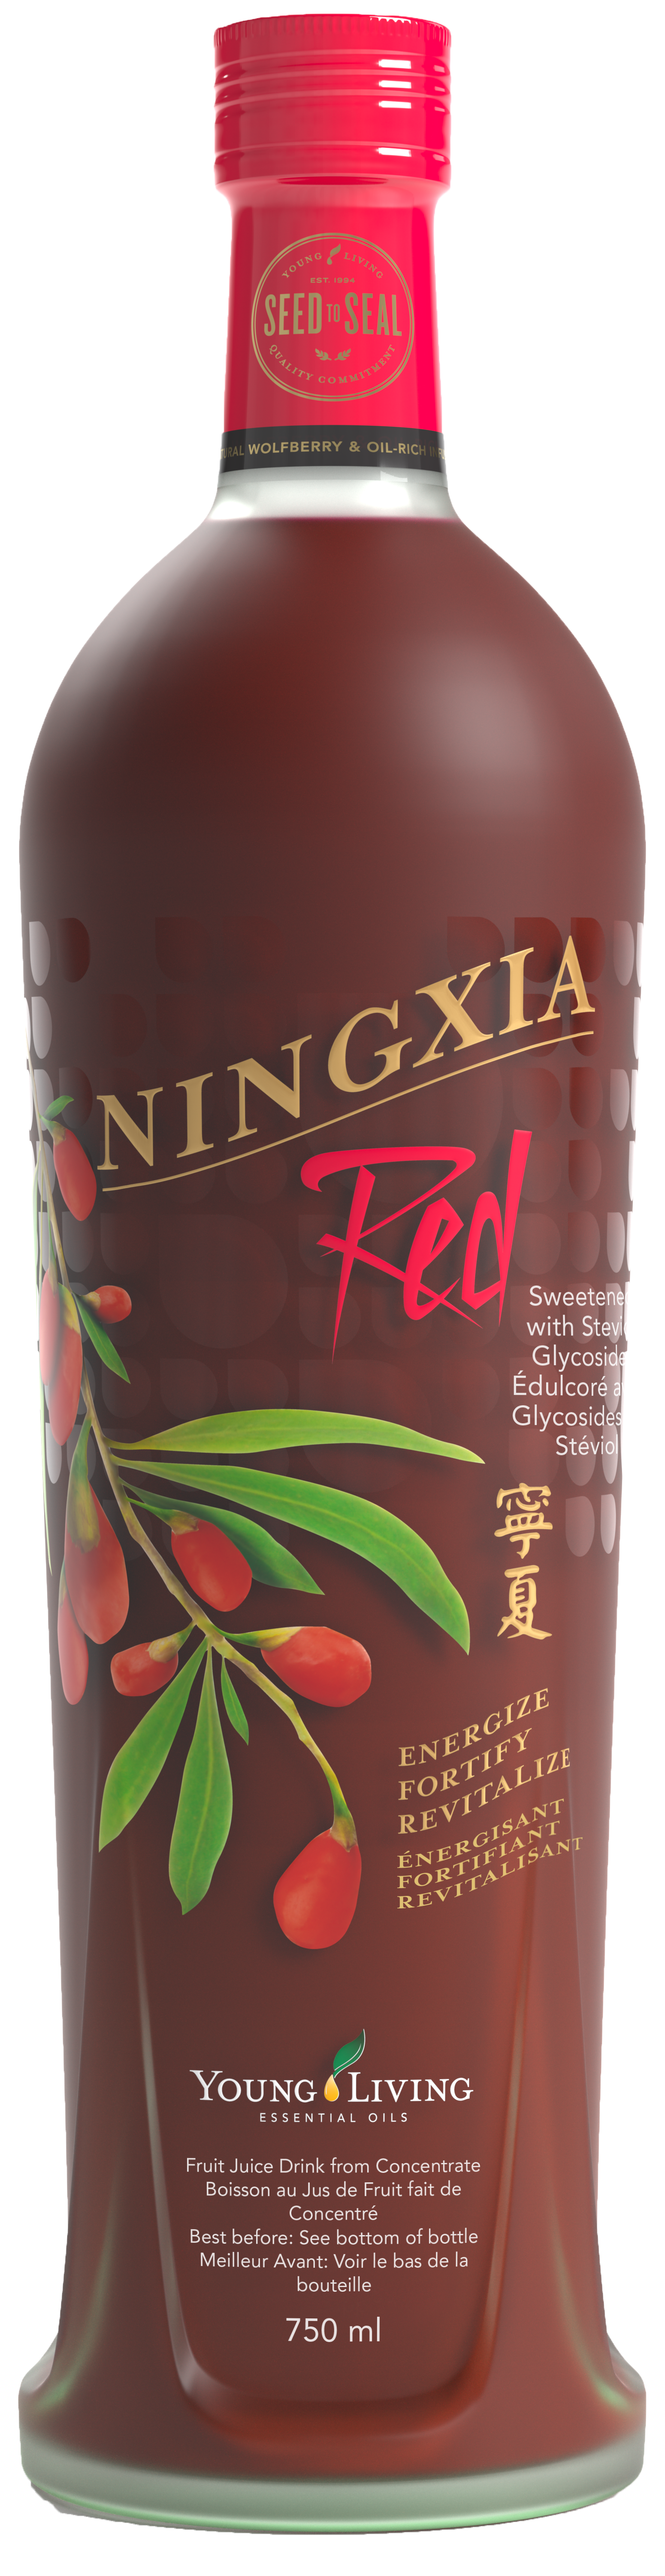 Ningxia Red Glass Bottle